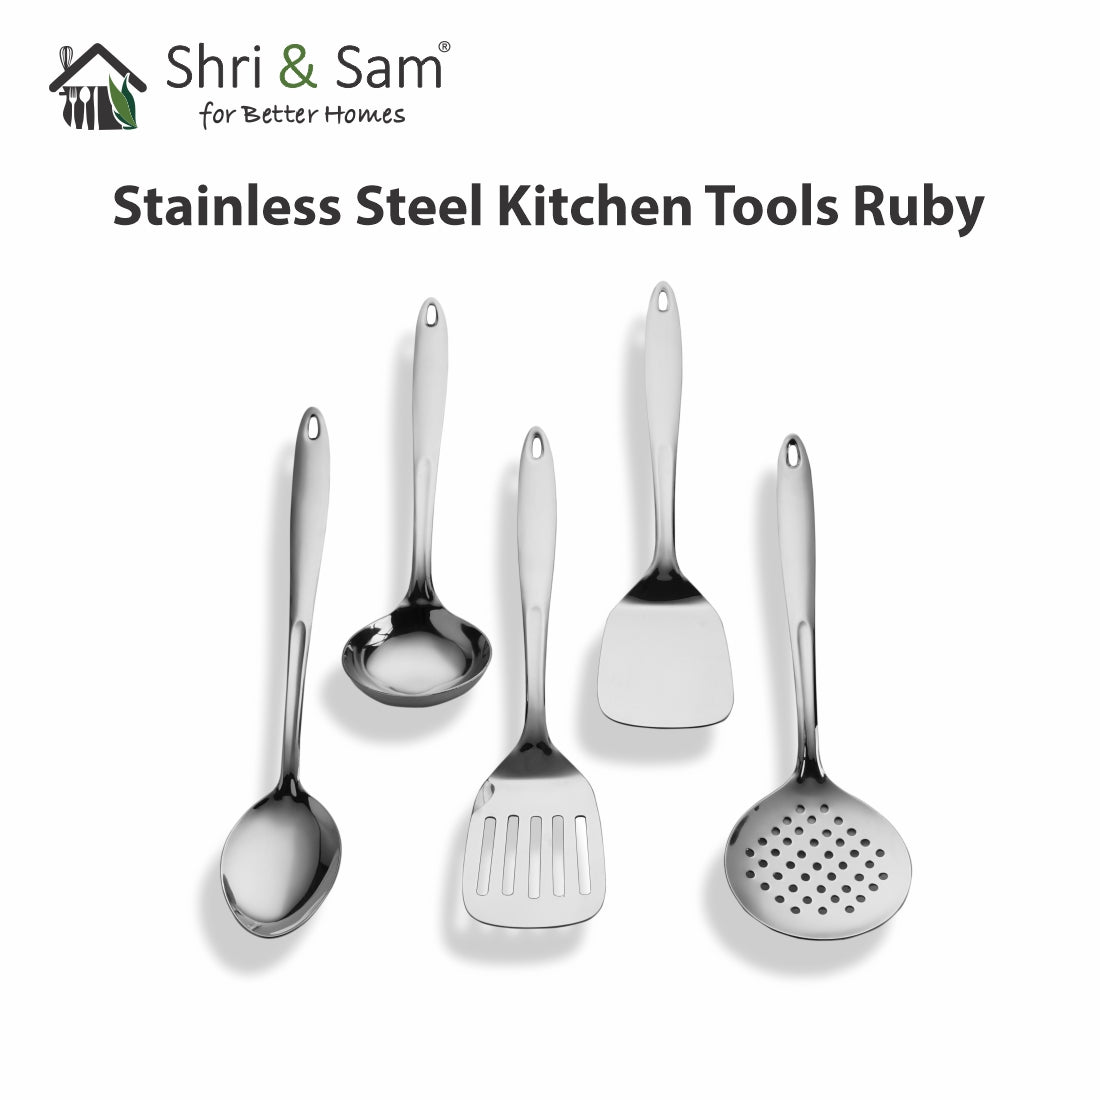 Stainless Steel Kitchen Tools Ruby